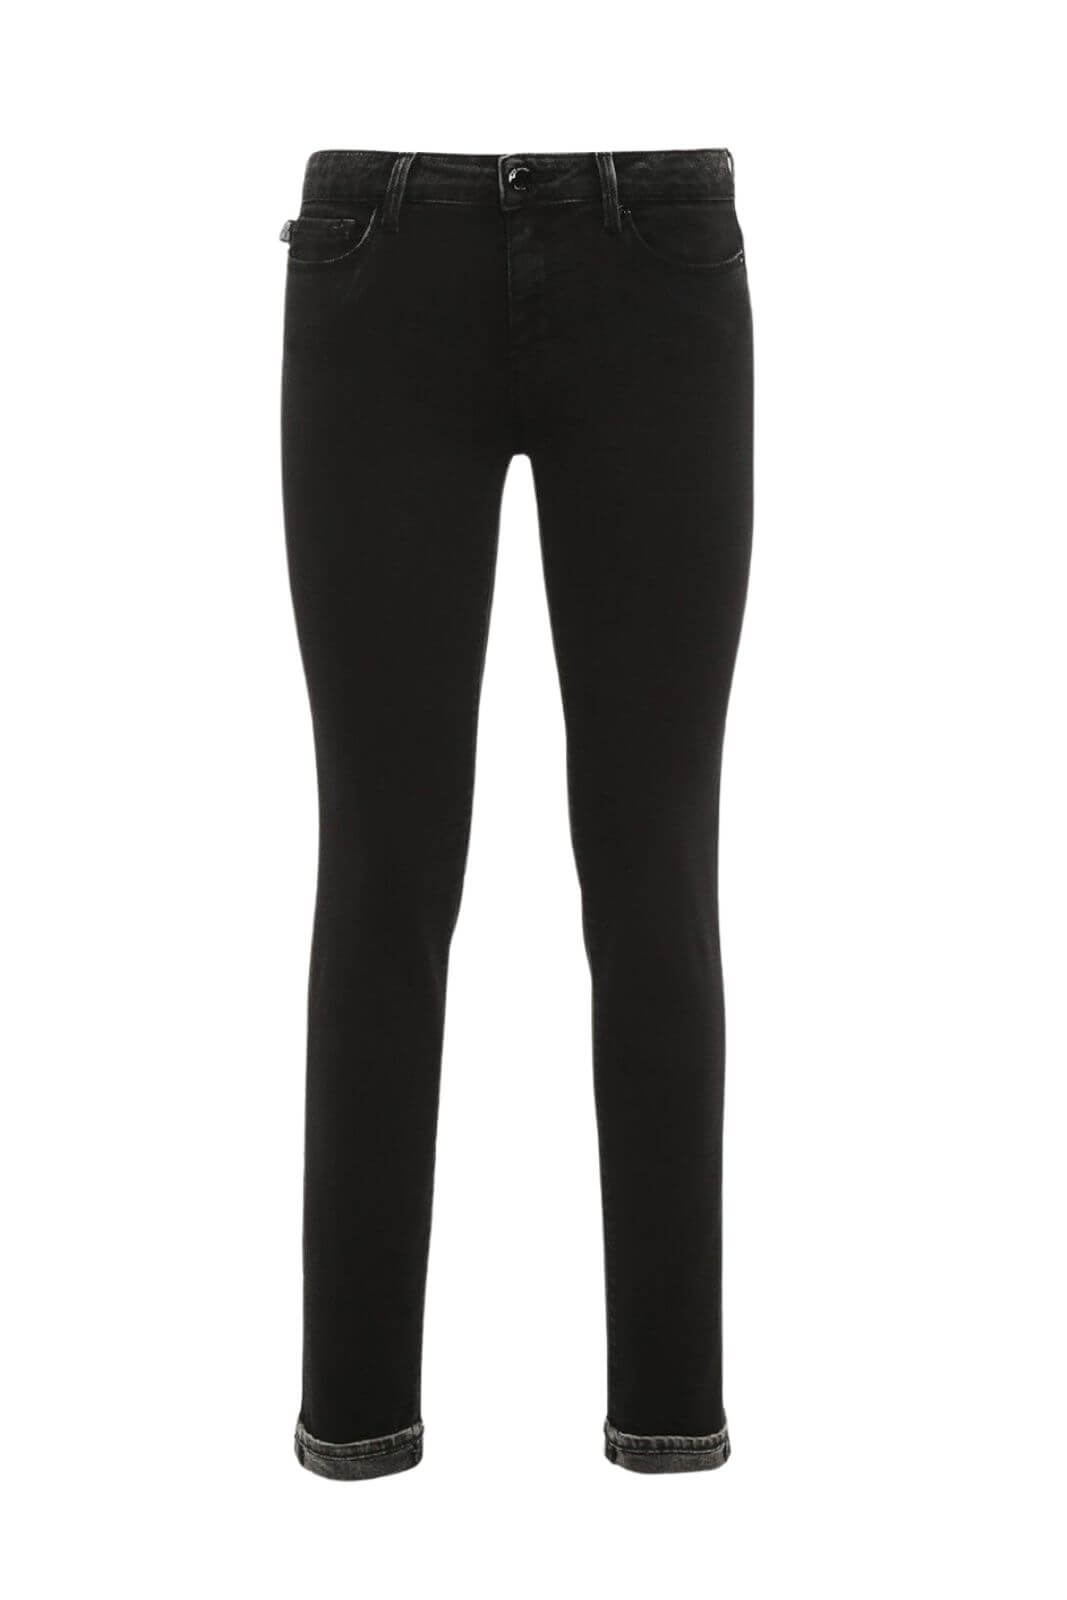 Love Moschino women's slim fit jeans